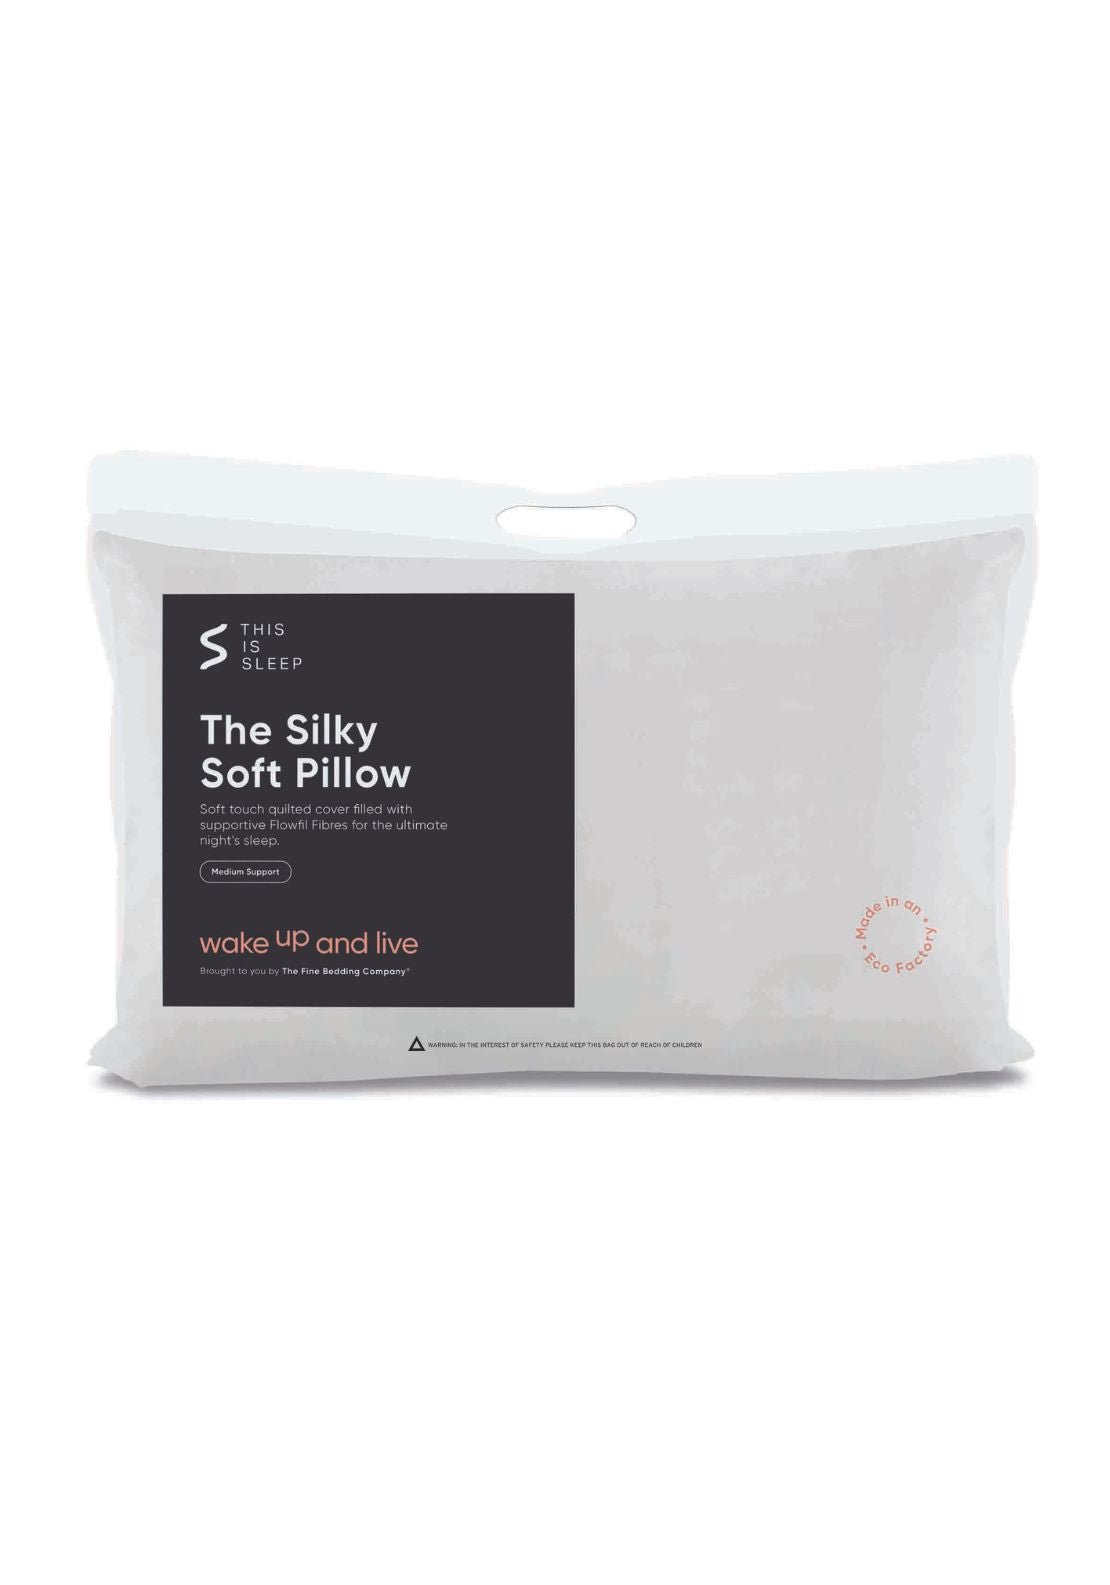 The Fine Bedding Company The Silky Soft Pillow 1 Shaws Department Stores